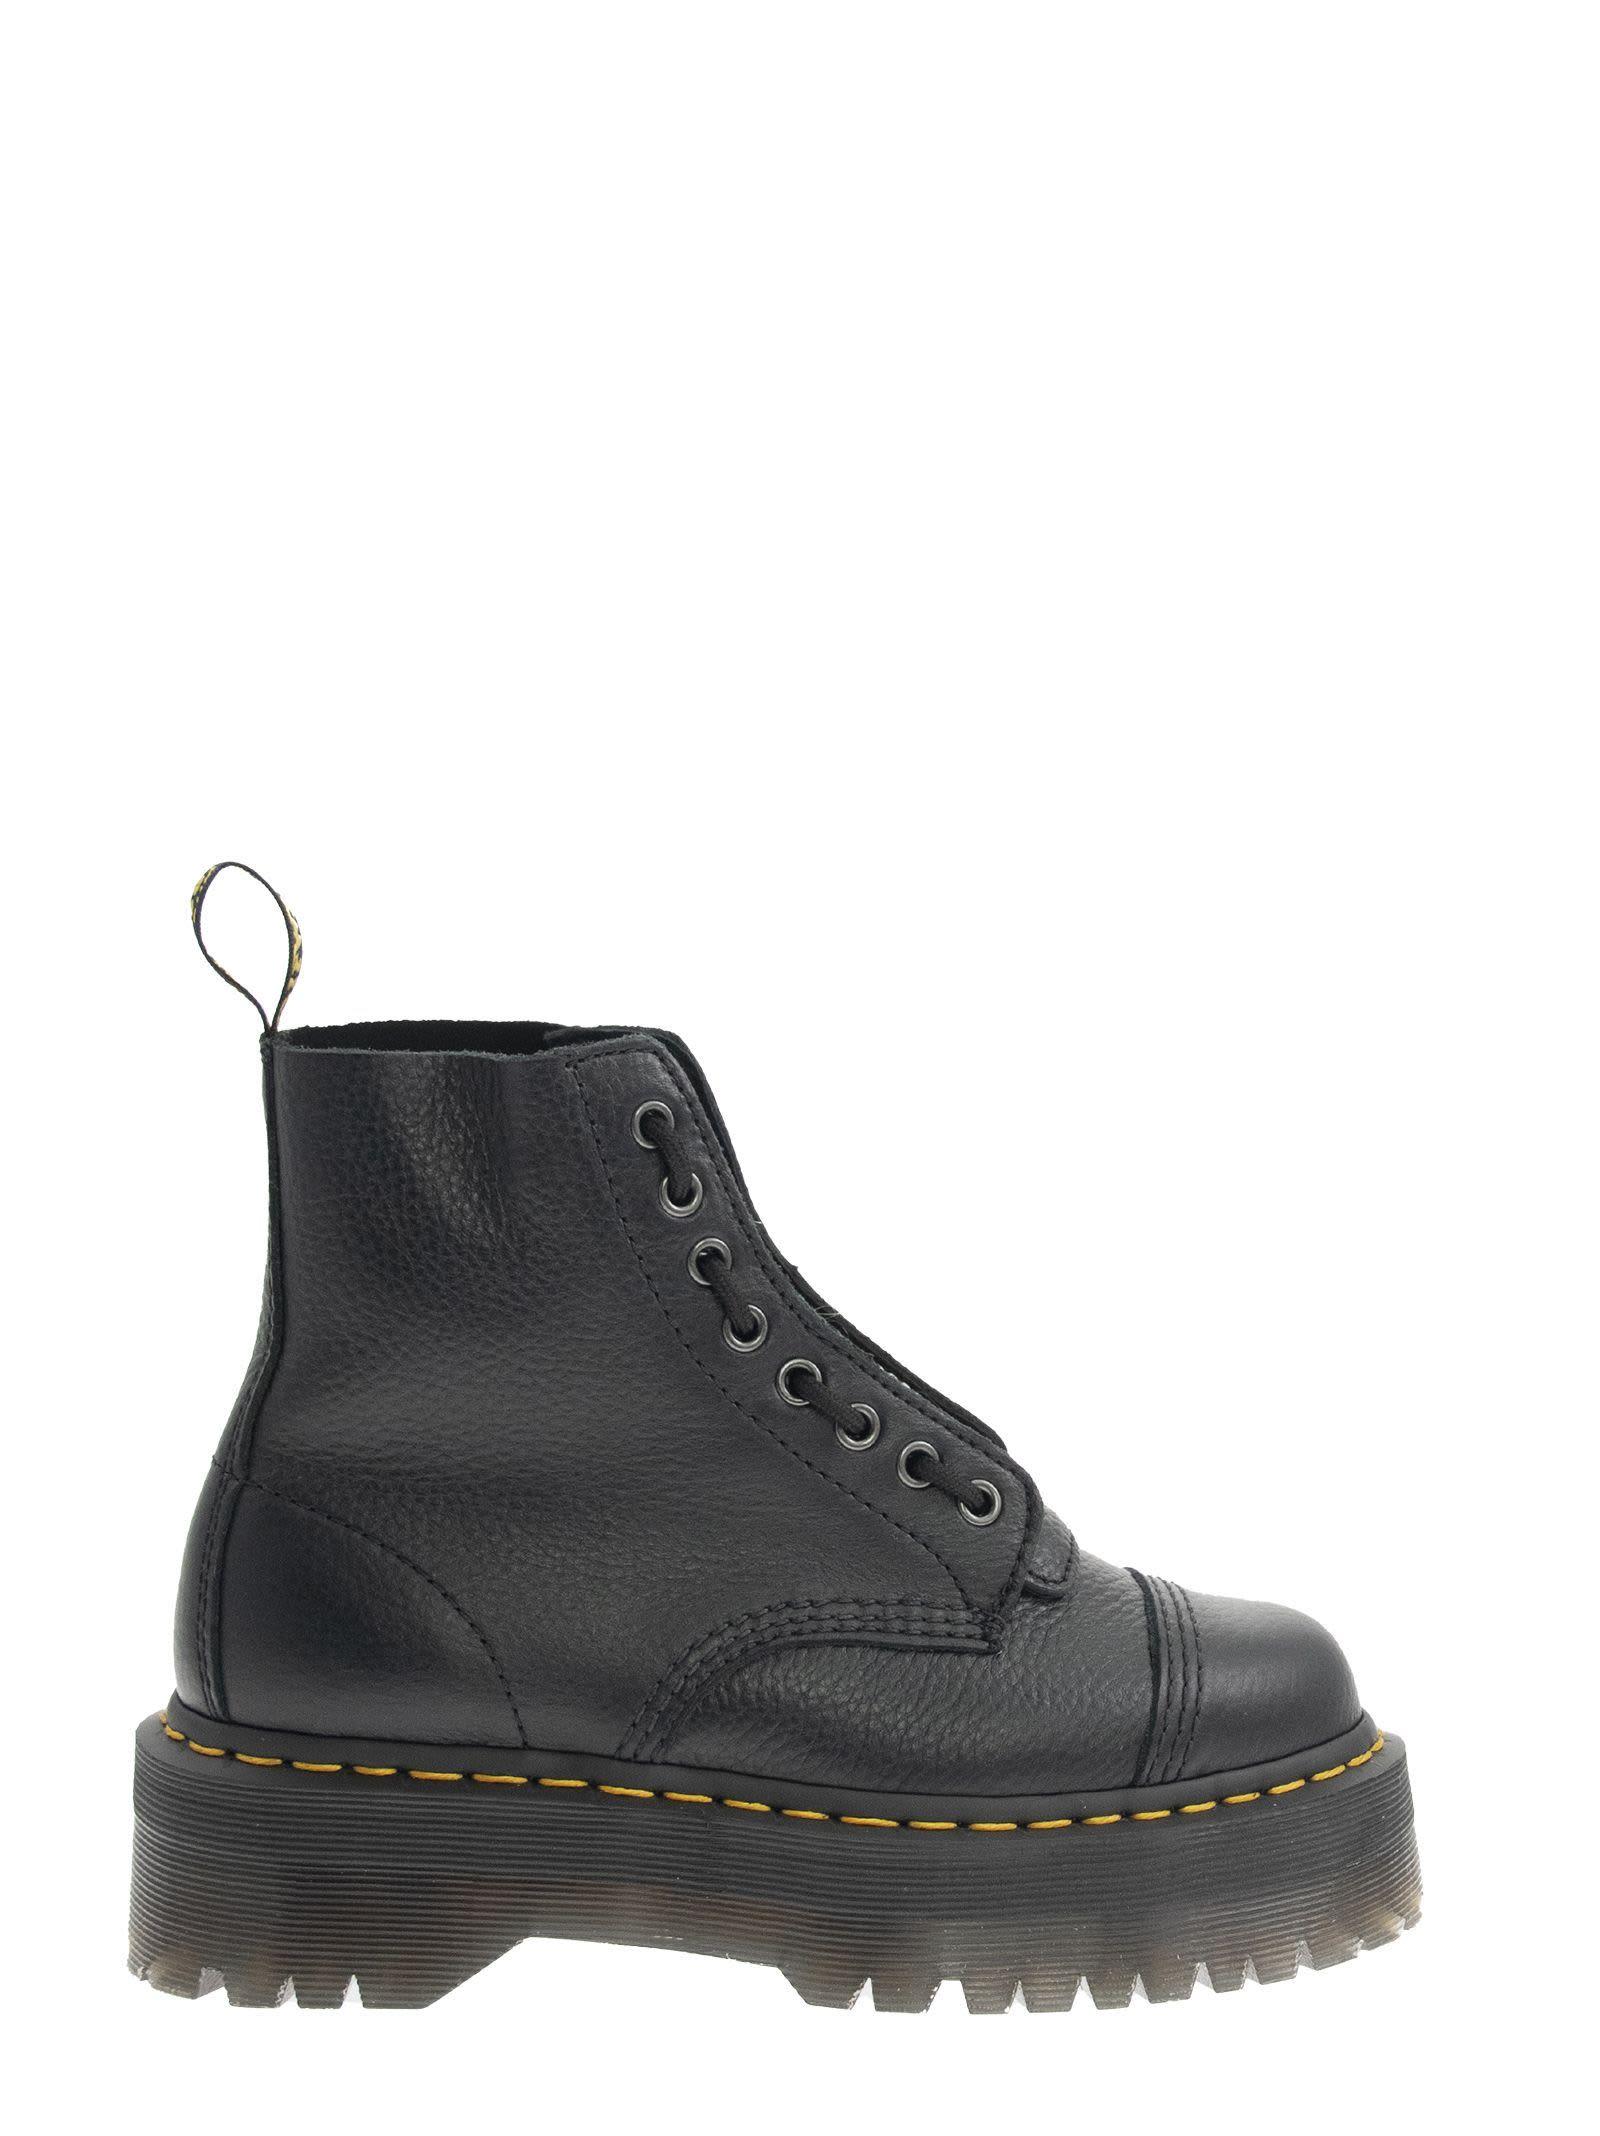 Dr. Martens Sinclair - Ankle Boots With Platform in Black | Lyst